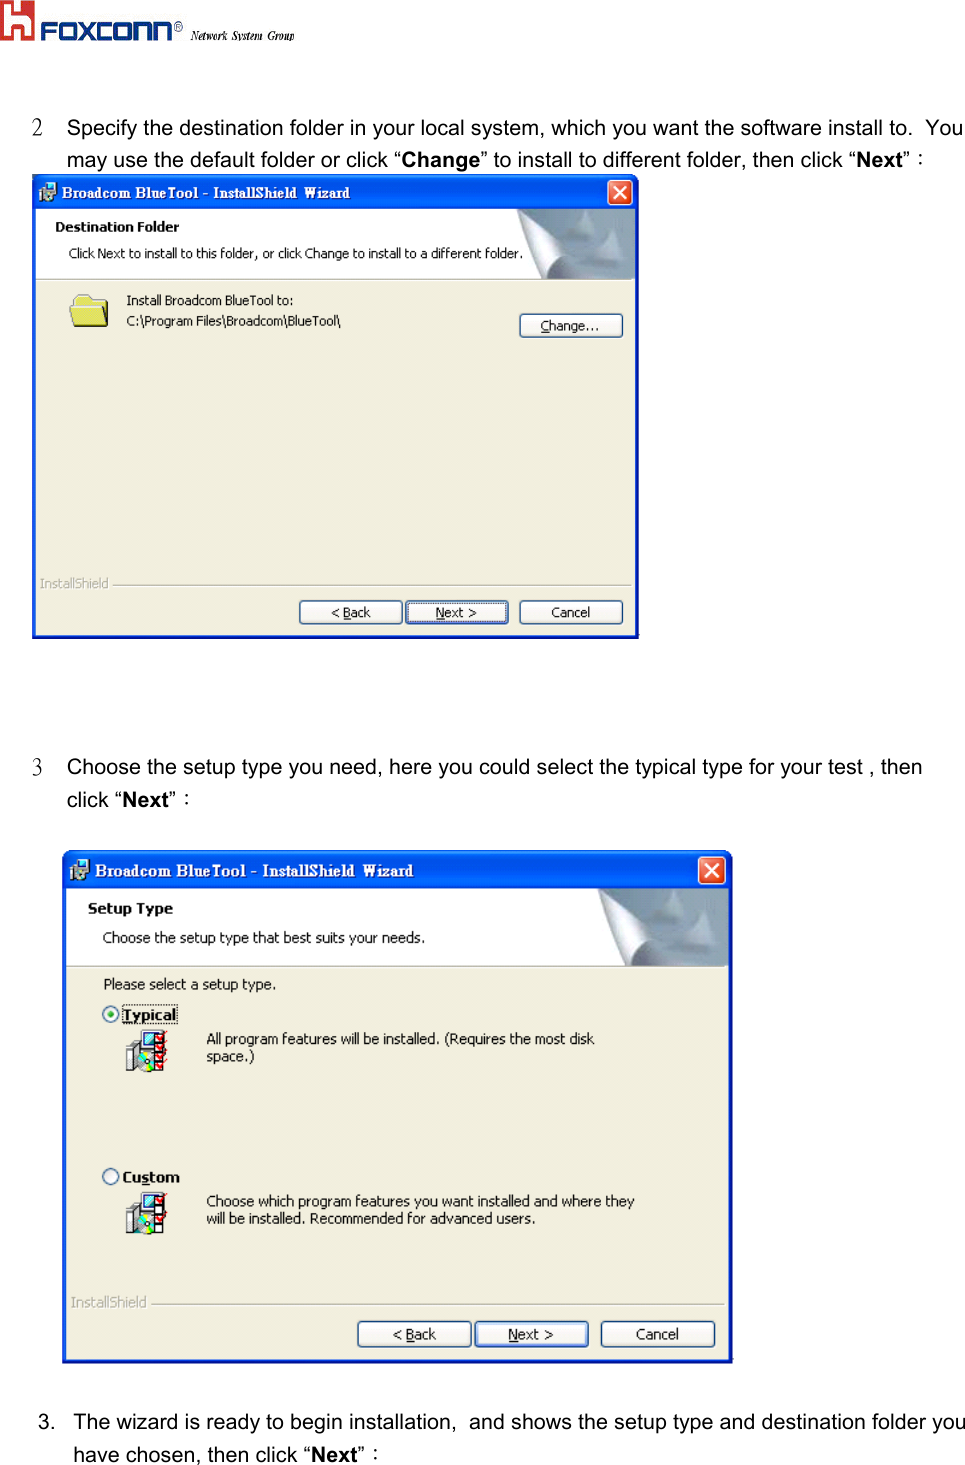   2  Specify the destination folder in your local system, which you want the software install to.  You may use the default folder or click “Change” to install to different folder, then click “Next”：                 3  Choose the setup type you need, here you could select the typical type for your test , then click “Next”：          3.  The wizard is ready to begin installation,  and shows the setup type and destination folder you have chosen, then click “Next”： 